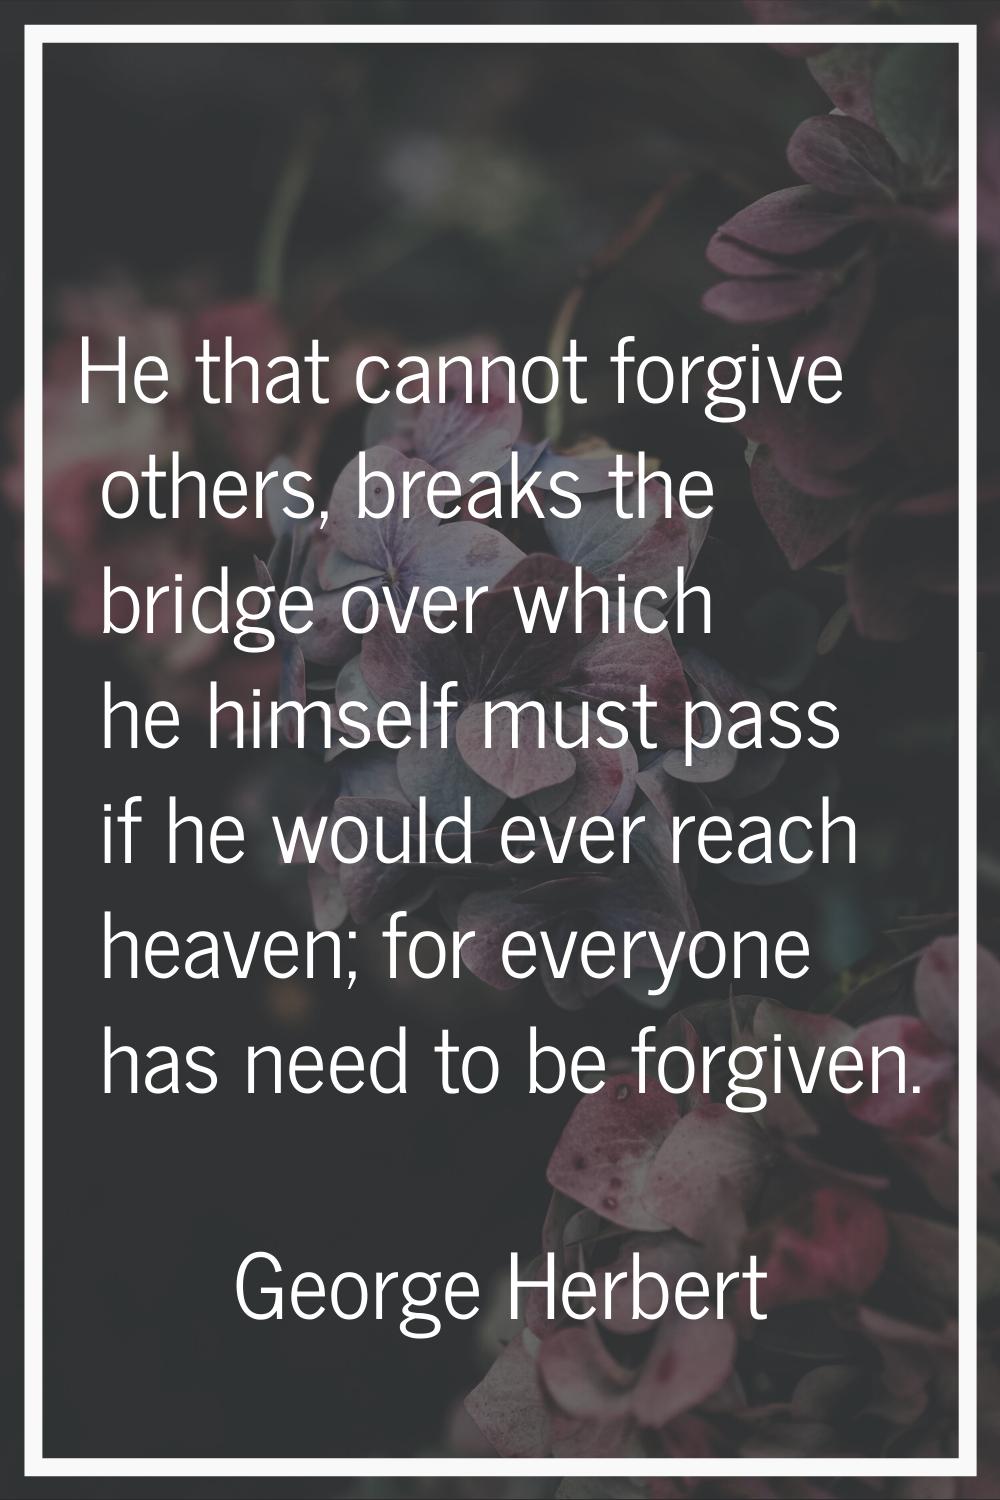 He that cannot forgive others, breaks the bridge over which he himself must pass if he would ever r